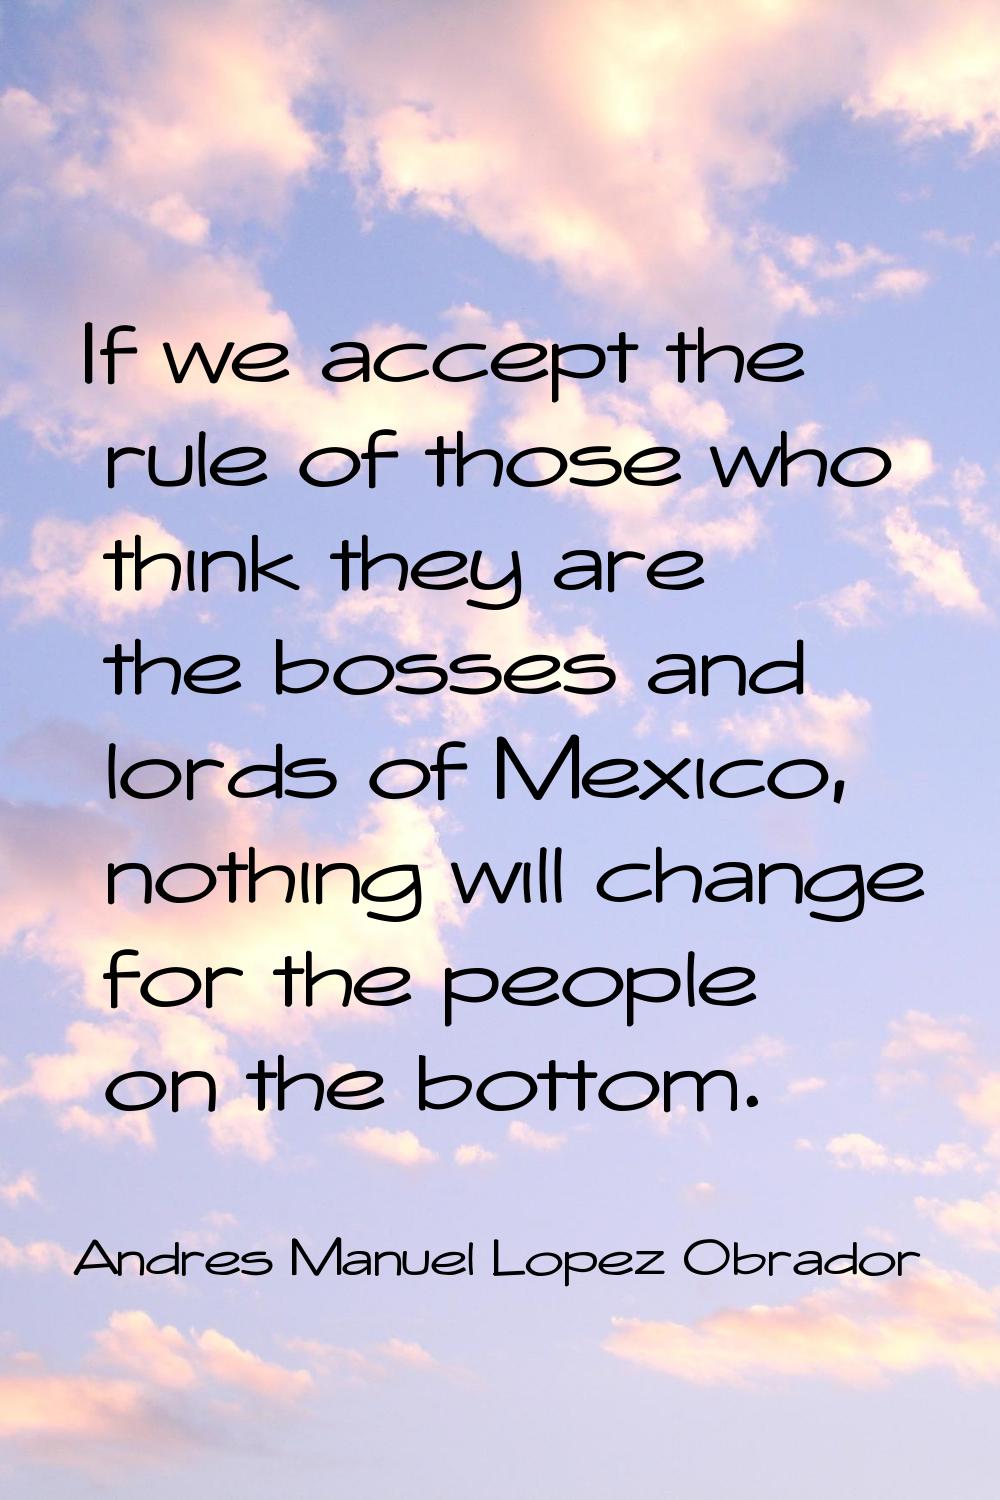 If we accept the rule of those who think they are the bosses and lords of Mexico, nothing will chan